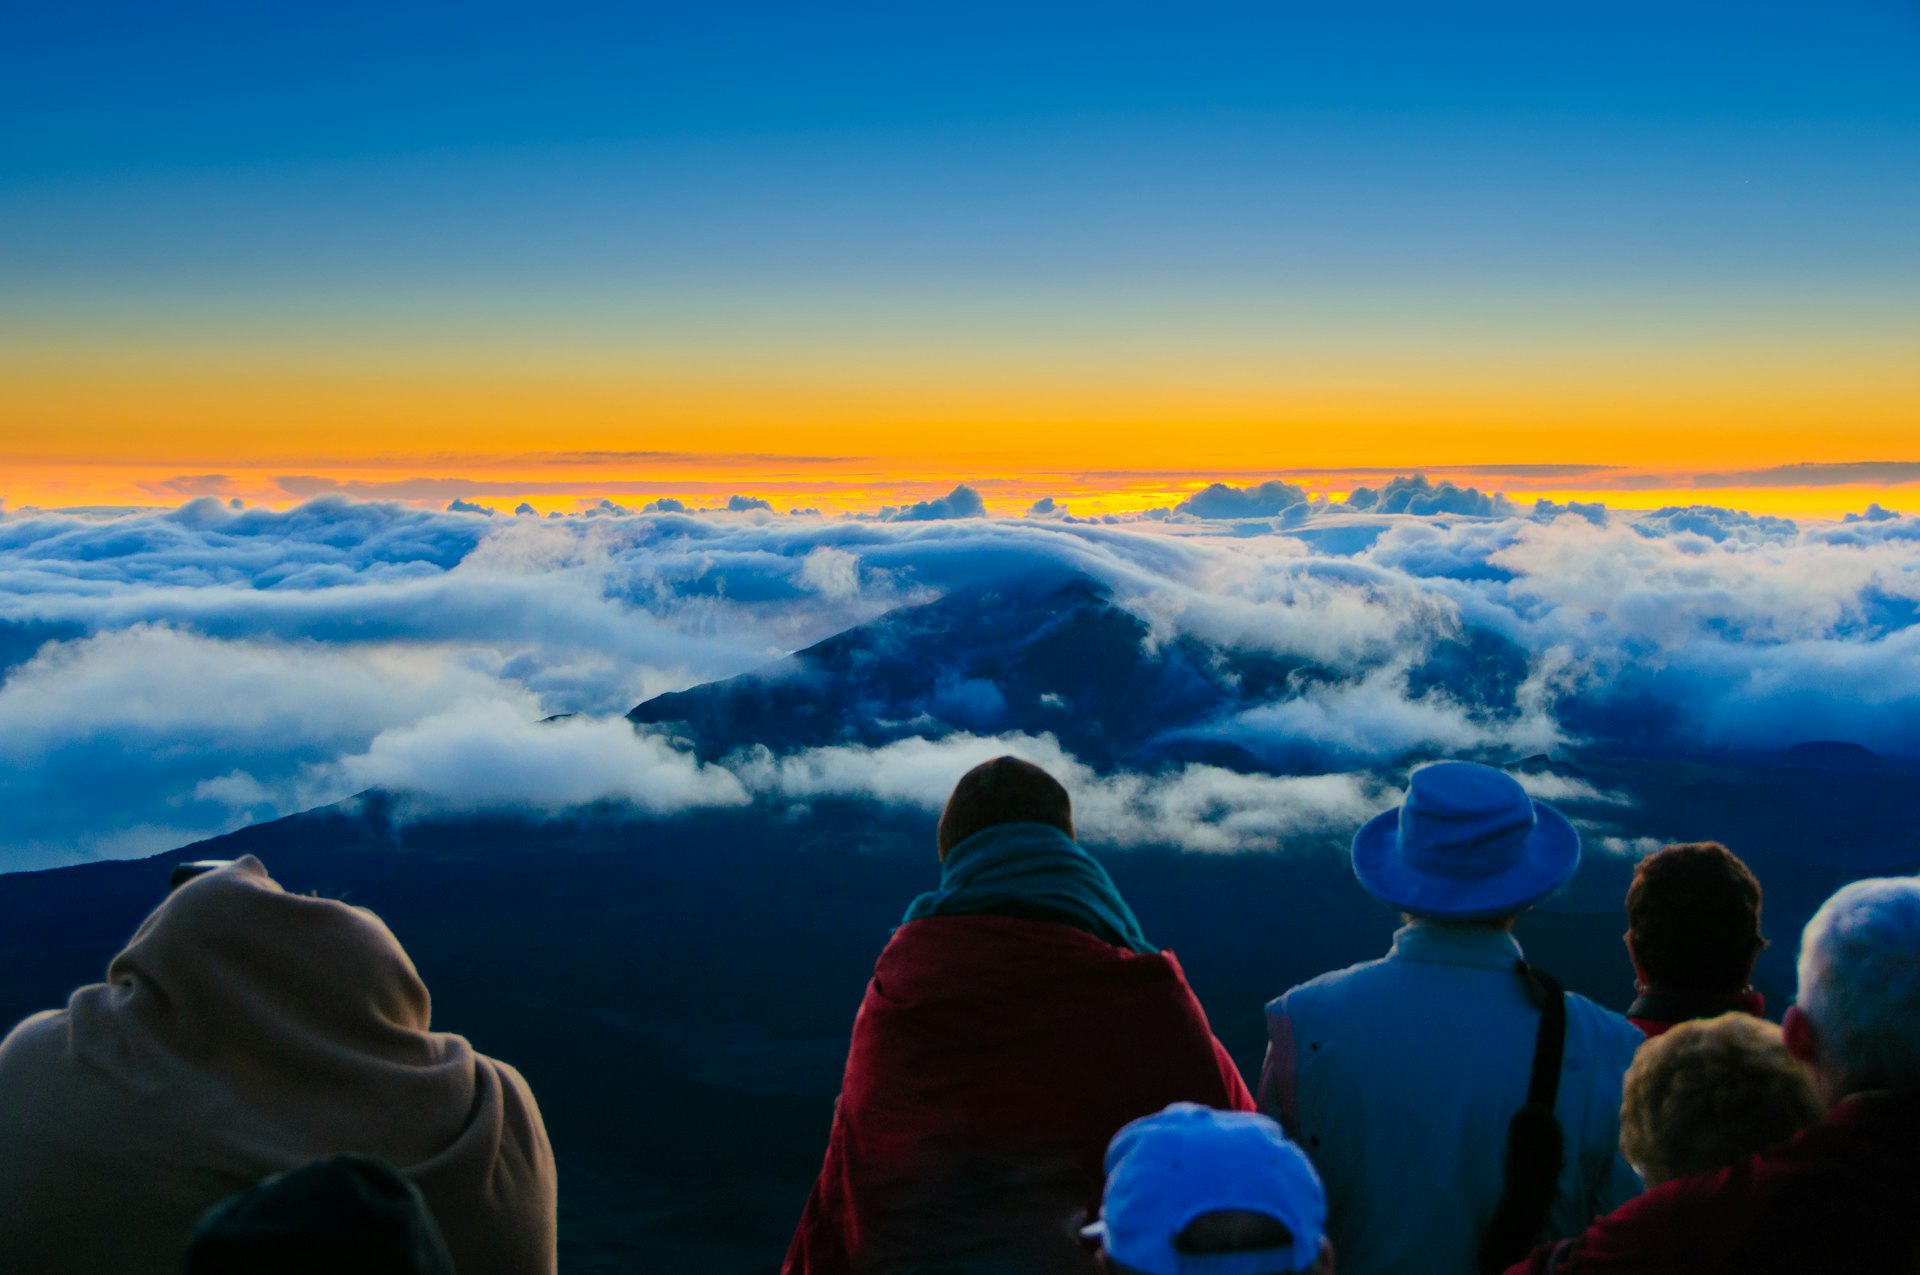 People huddle together at a viewpoint to watch the sunrise over clouds and volcanic peaks